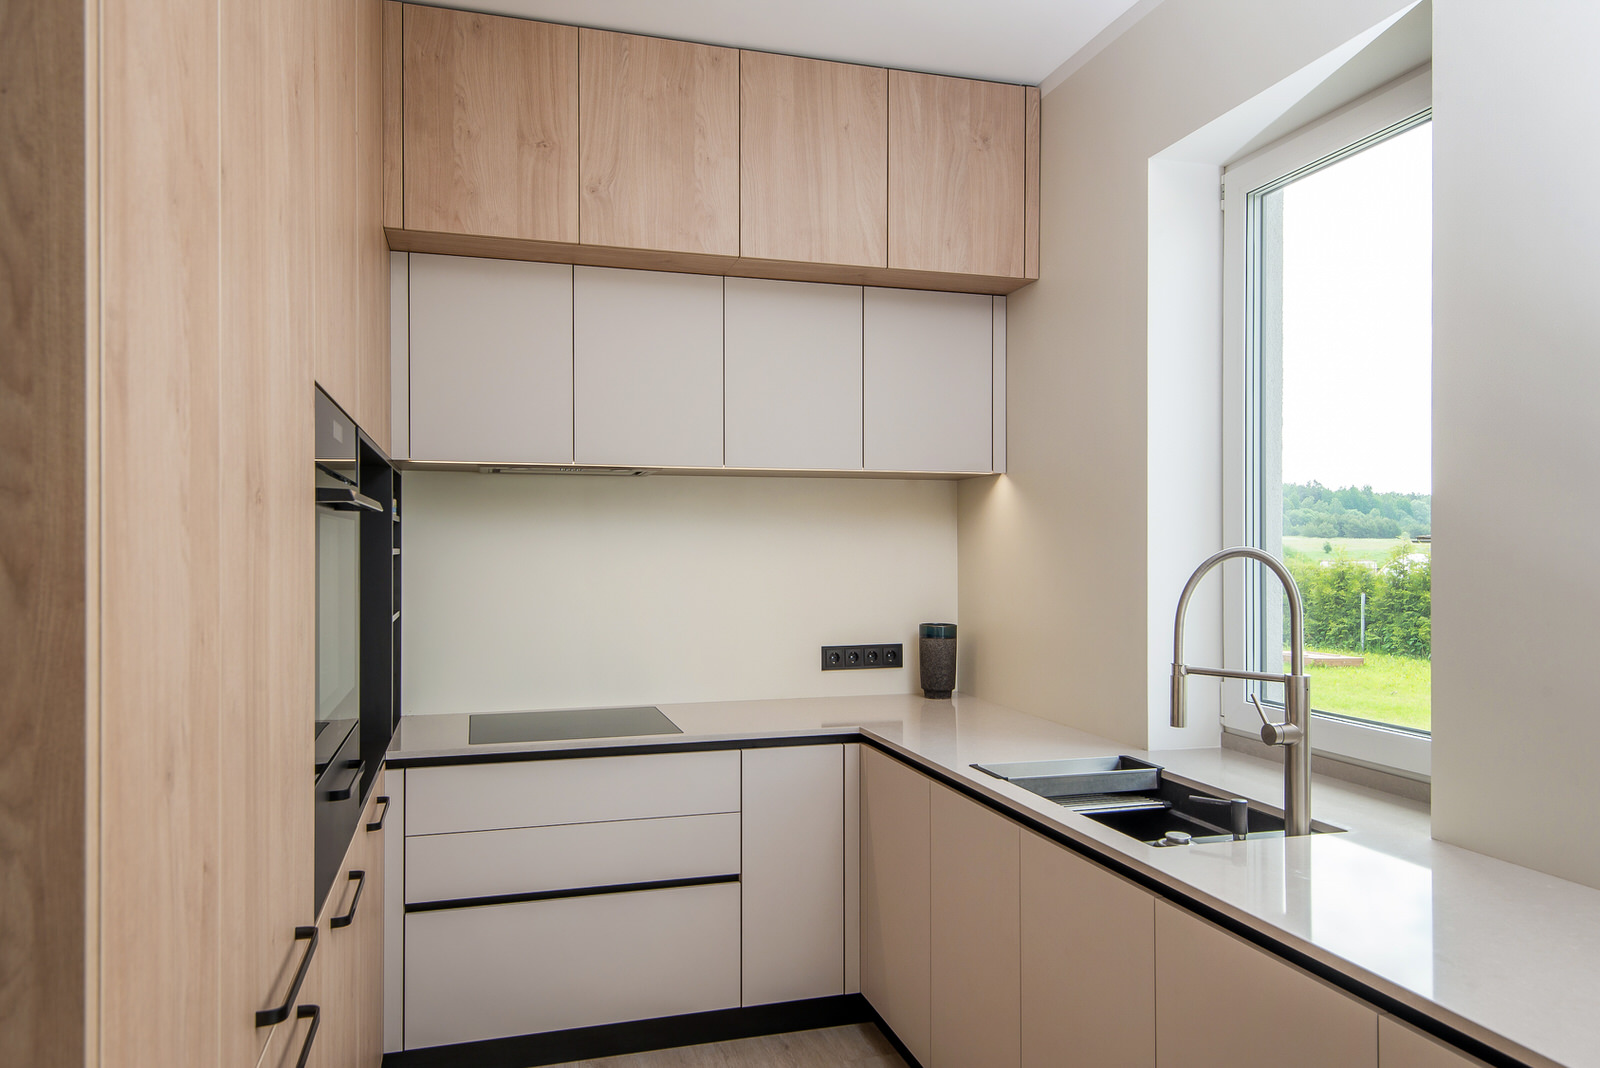 Kitchen in Salaspils with white facades and wooden texture cabinet